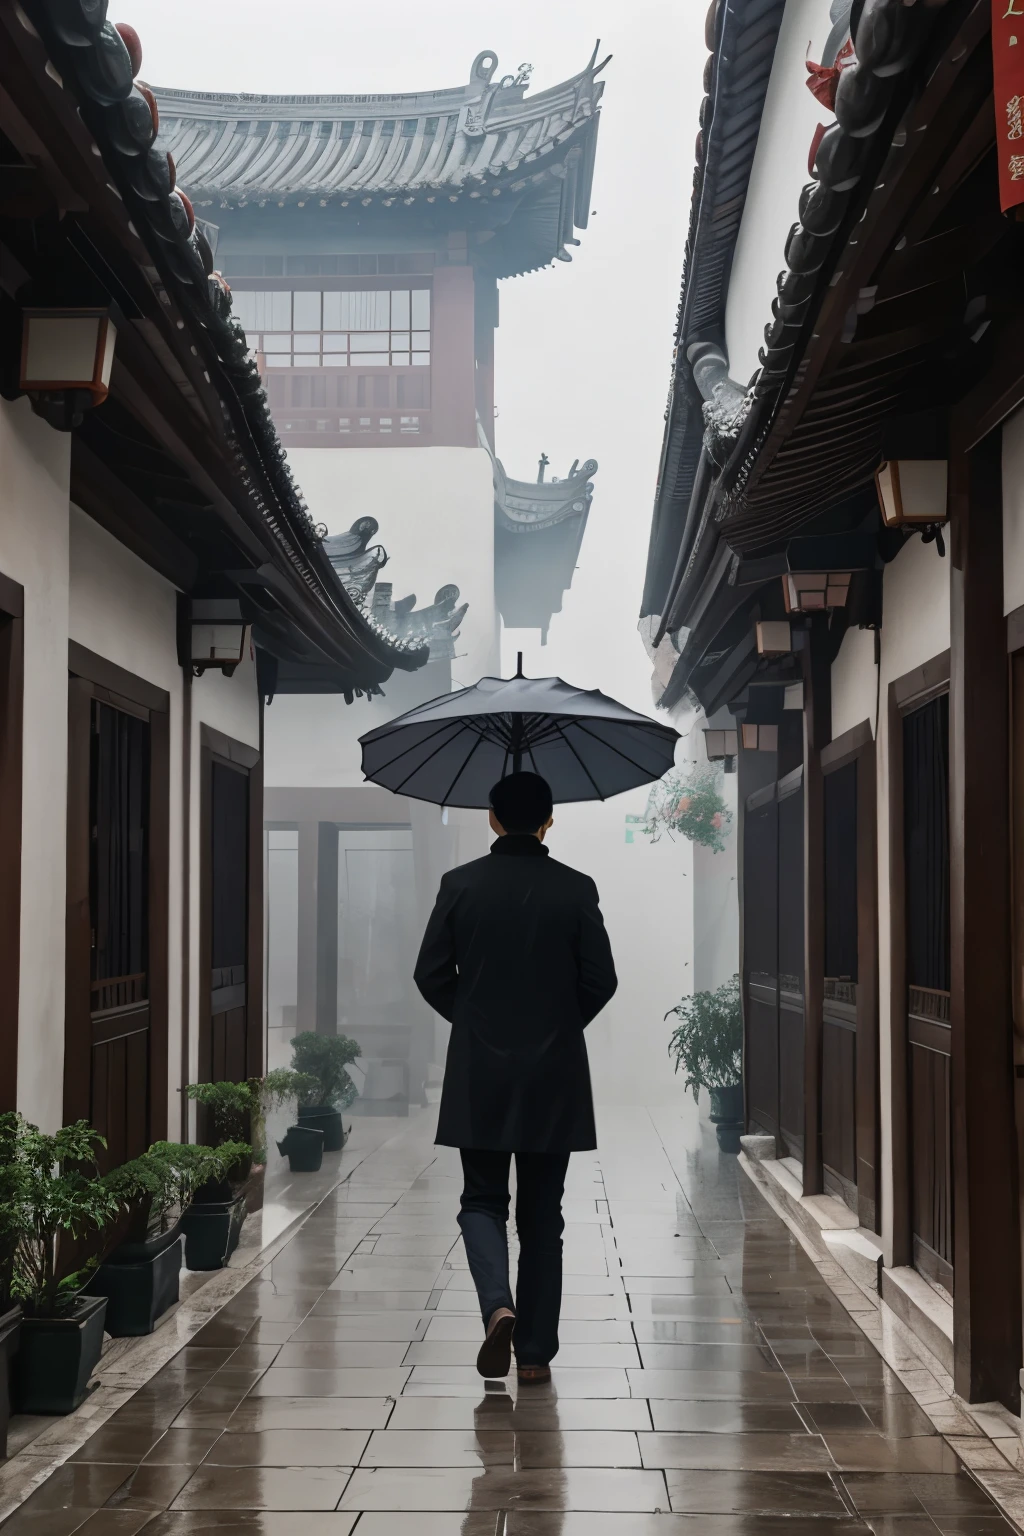 Tianjing Courtyard, Sheng Family Old House，The surroundings are hazy with drizzle，The man holding a black umbrella is tall and slender，Eyes sharp and calm，The mist in the rain is like looking at flowers through the fog.。